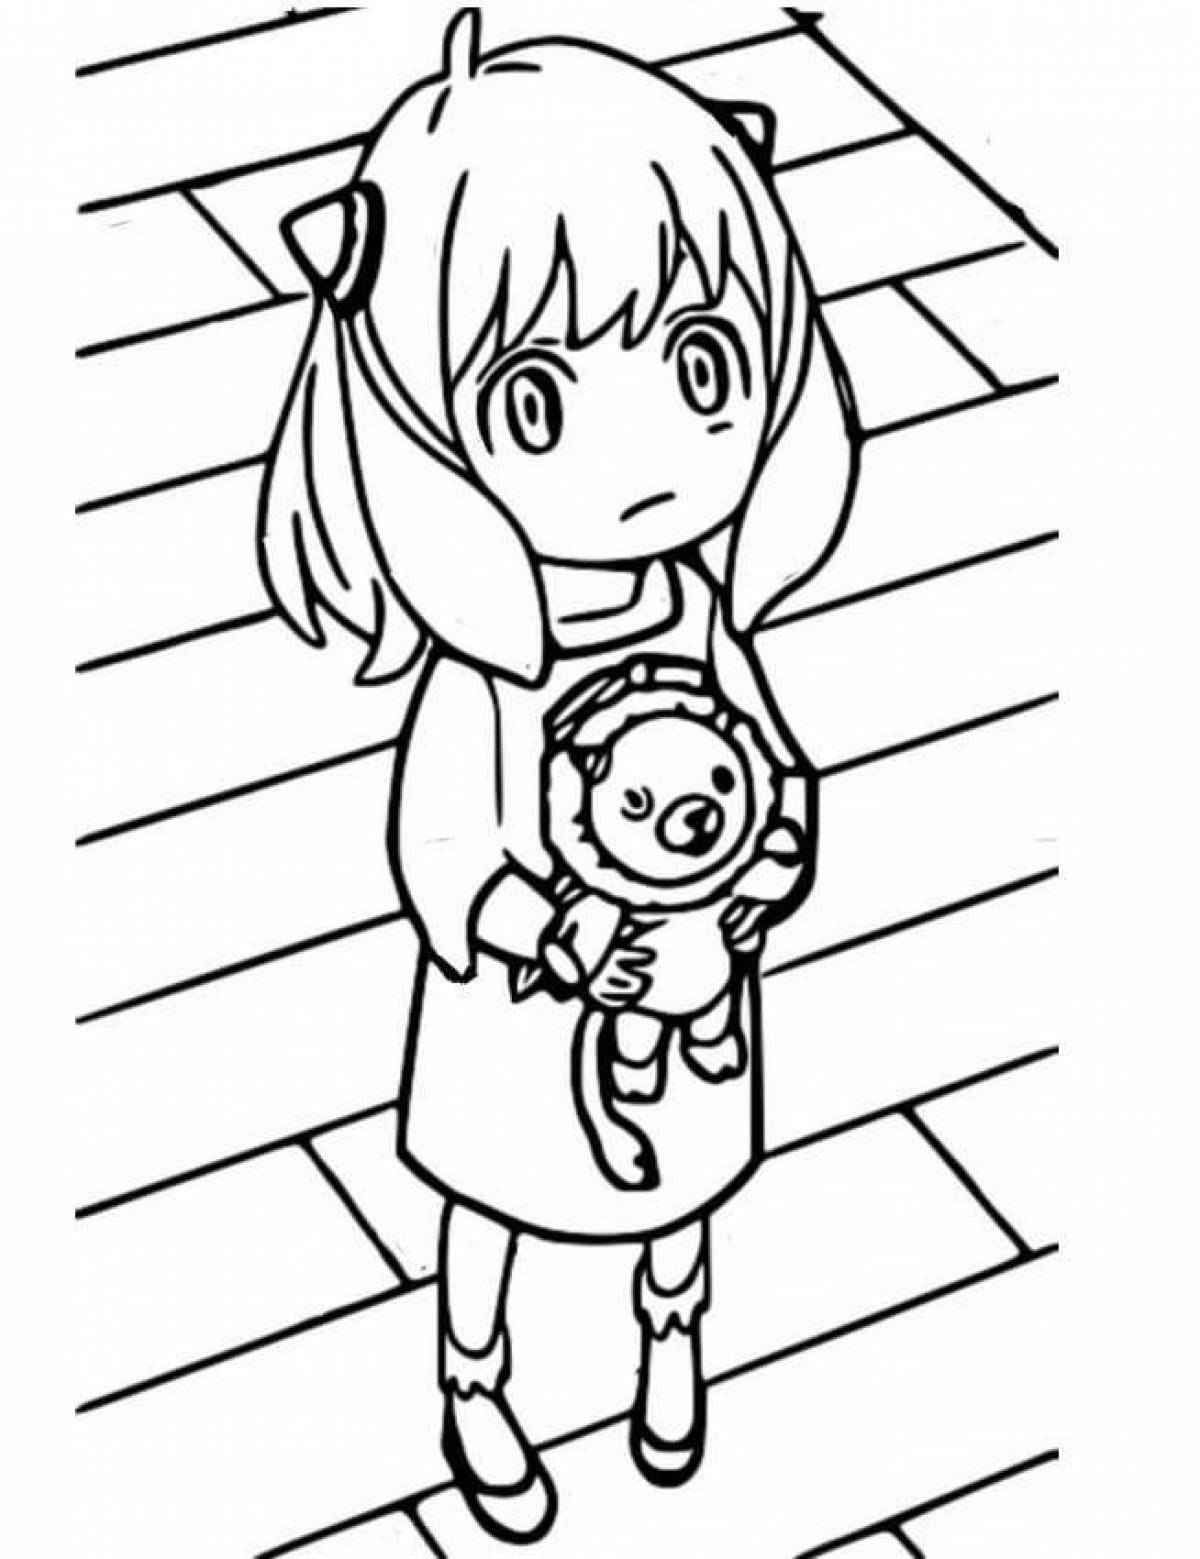 Grand Anja Forger Coloring Page